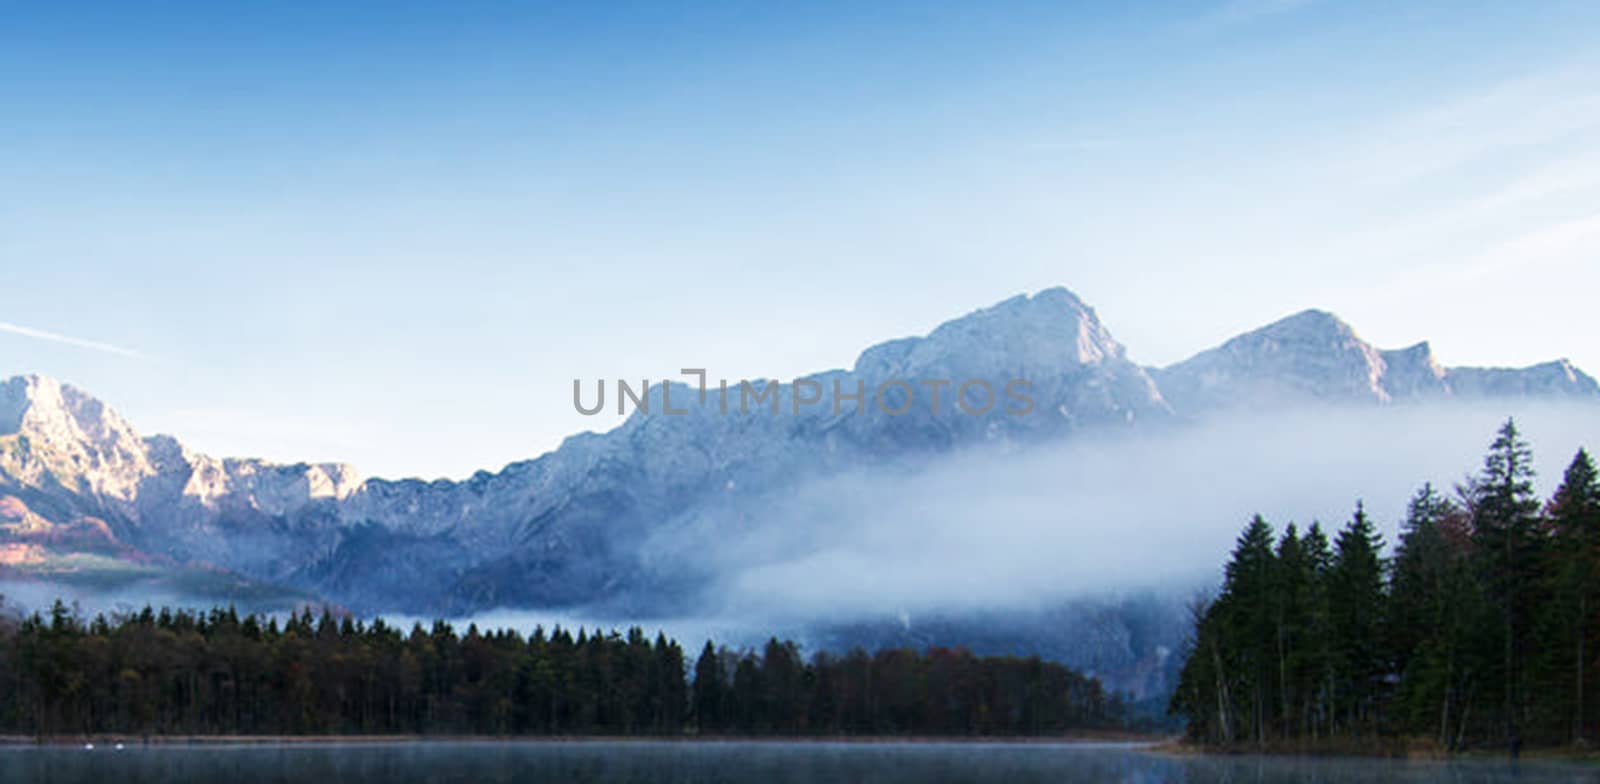 Beautiful pictures of Austria by TravelSync27